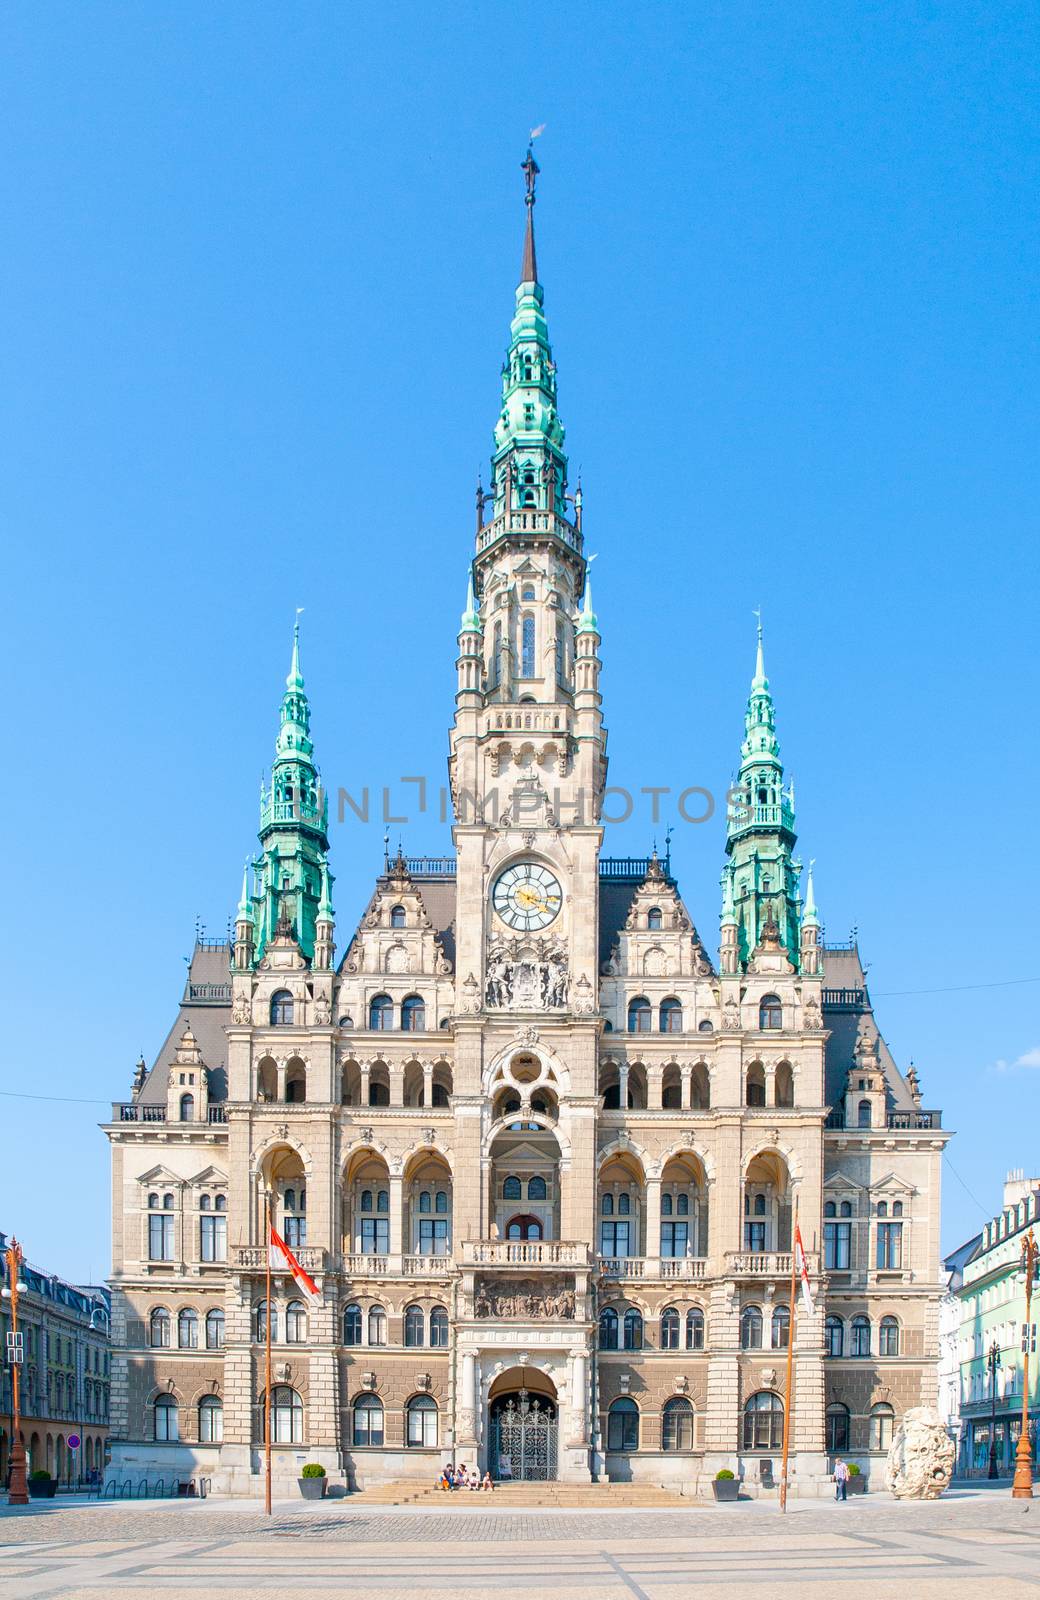 Town Hall on Edvard Benes Square in Liberec, Czech Republic.